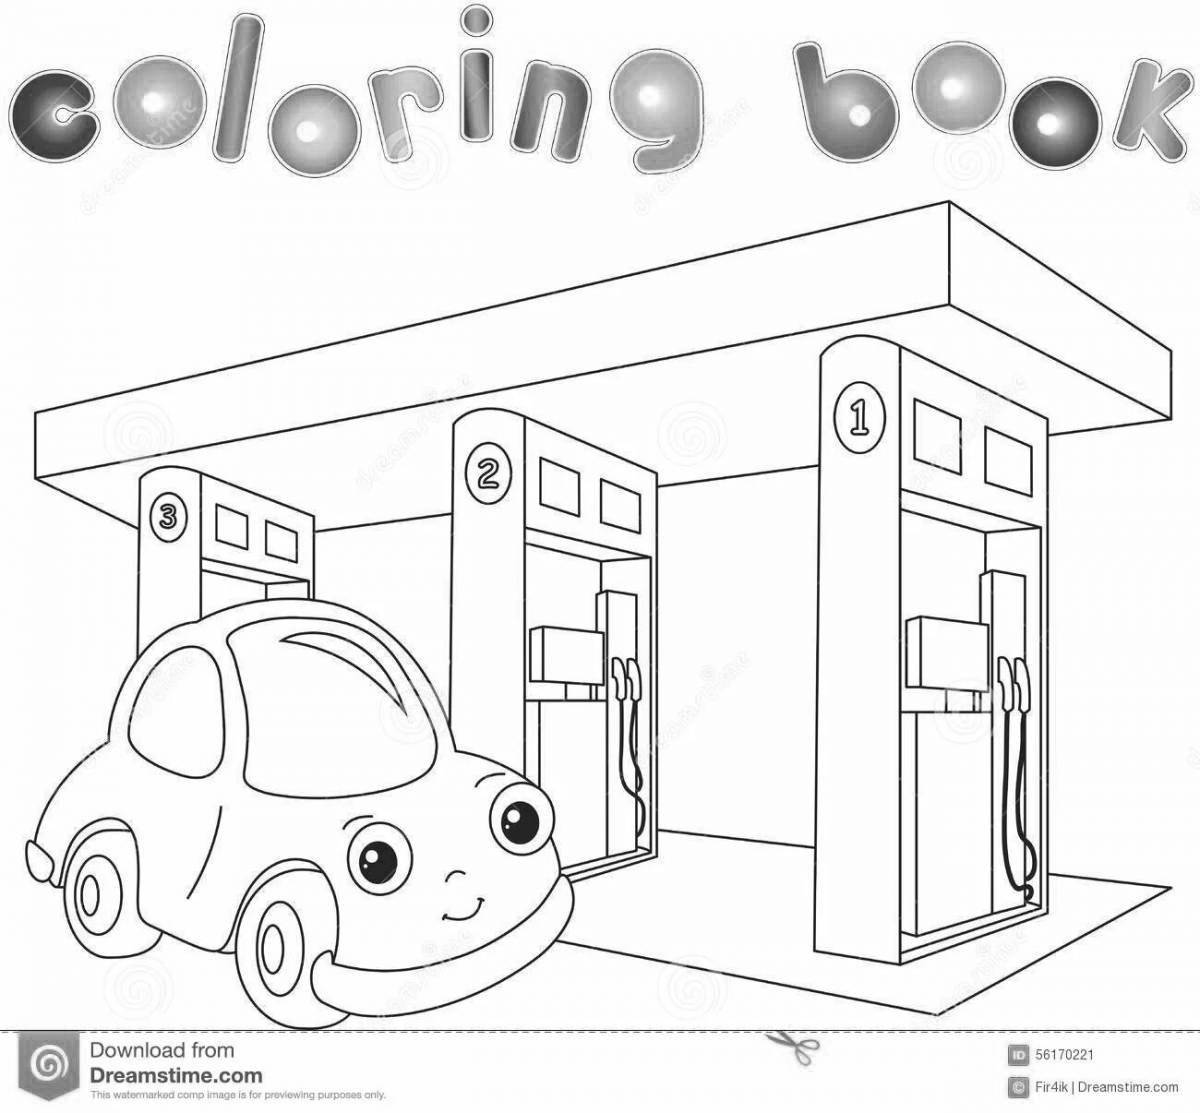 Colorful gas station coloring book